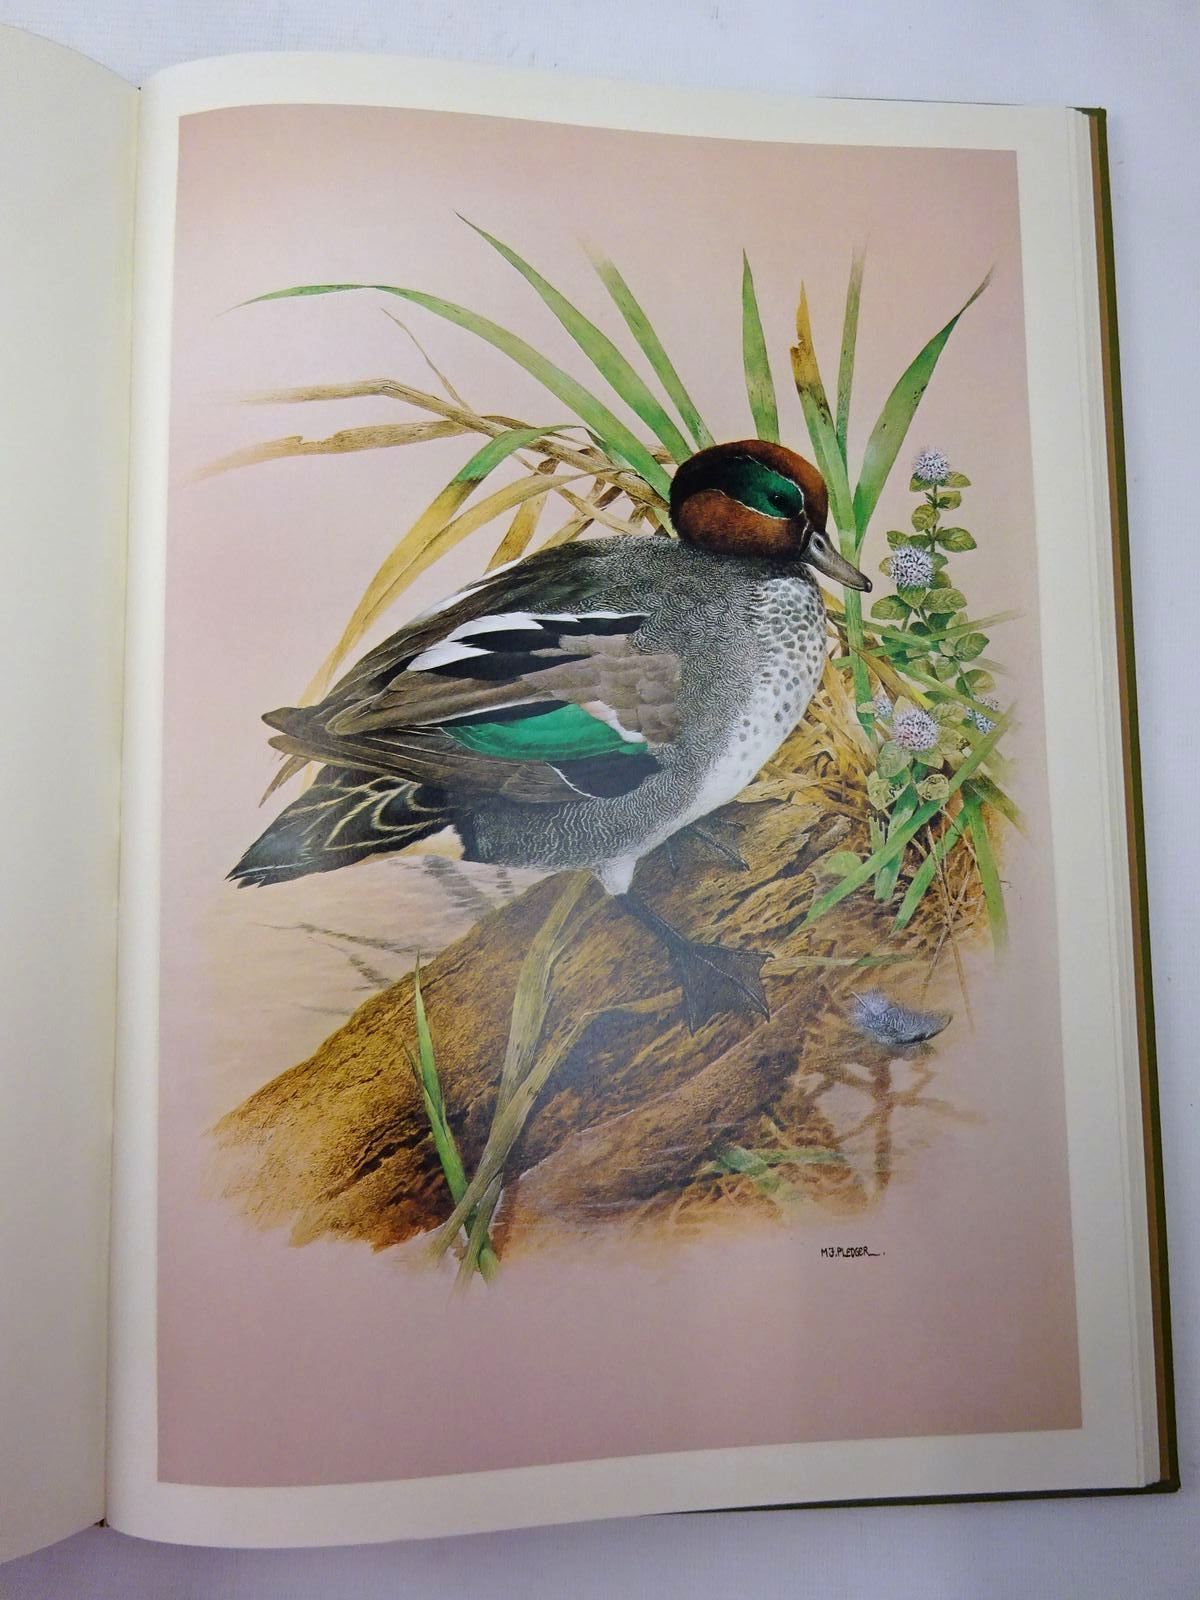 Photo of GAME BIRDS written by Coles, Charles illustrated by Pledger, Maurice published by Collins (STOCK CODE: 2129028)  for sale by Stella & Rose's Books